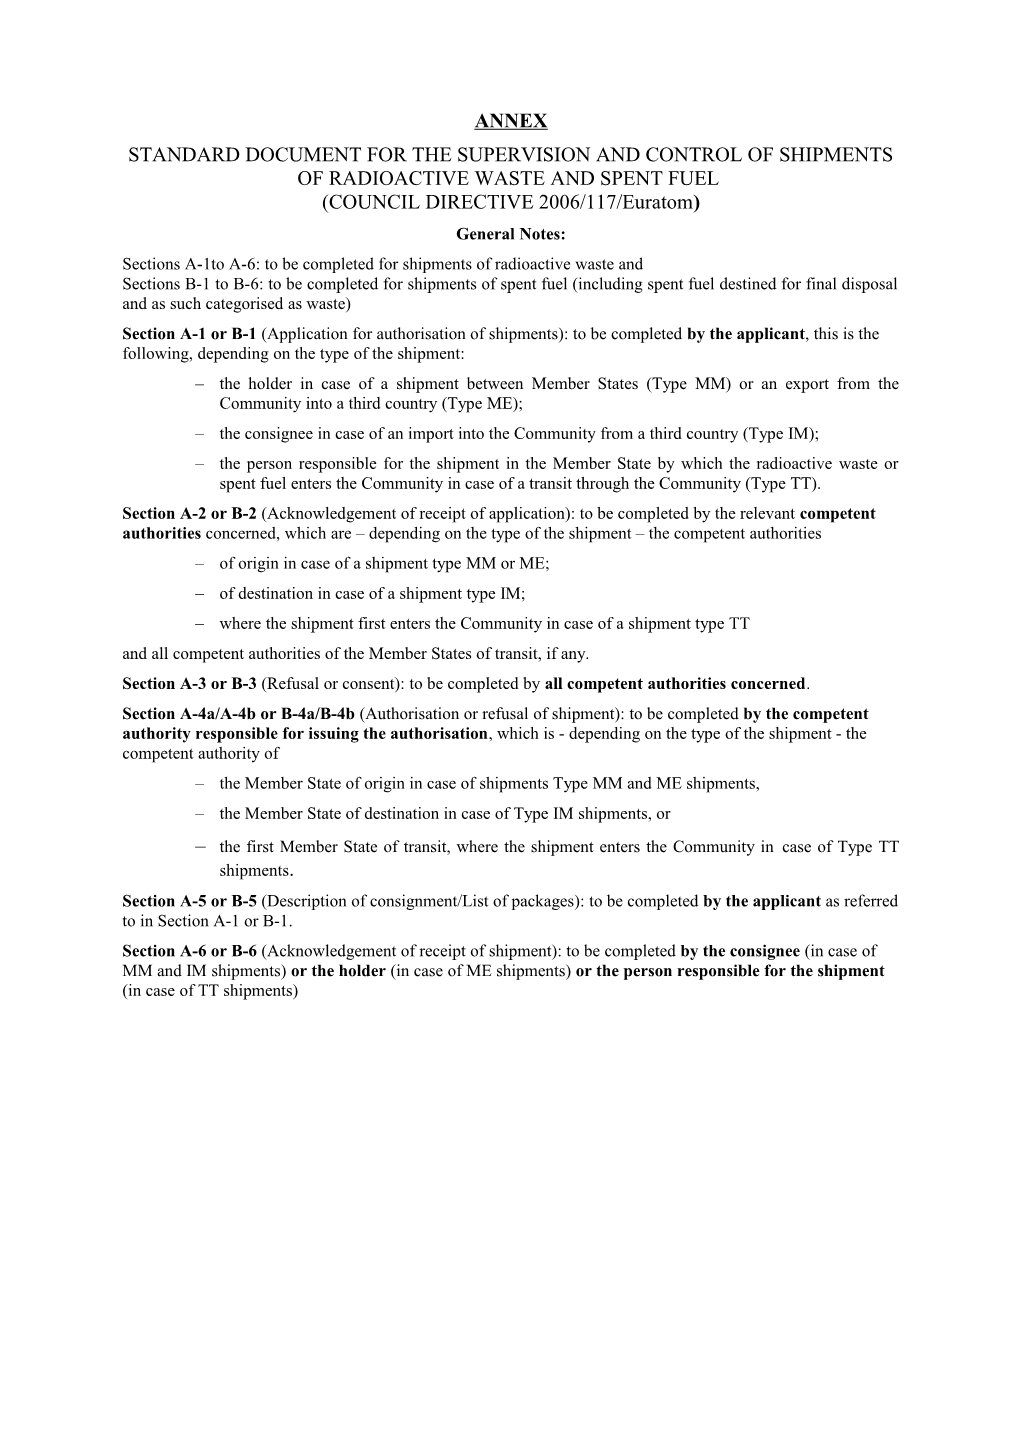 Standard Document for the Supervision and Control of Shipments of Radioactive Waste And